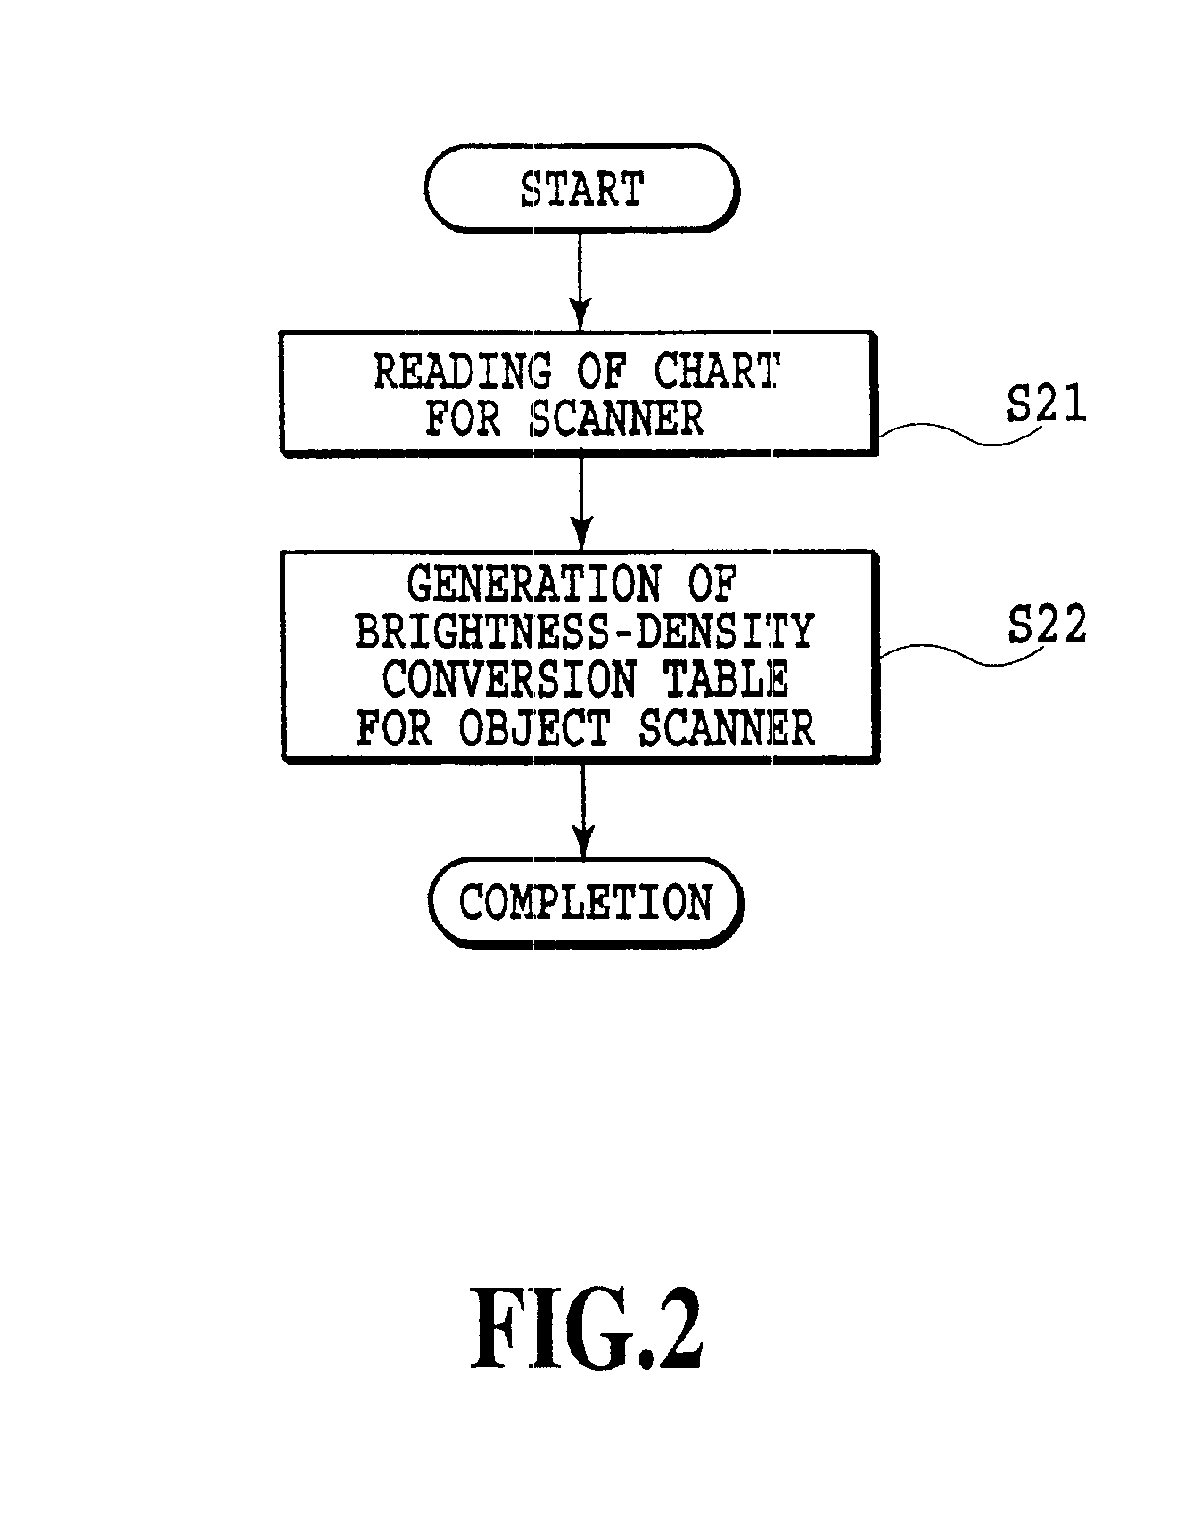 Image processing method of generating conversion data for a scanner and calibration method employing the scanner